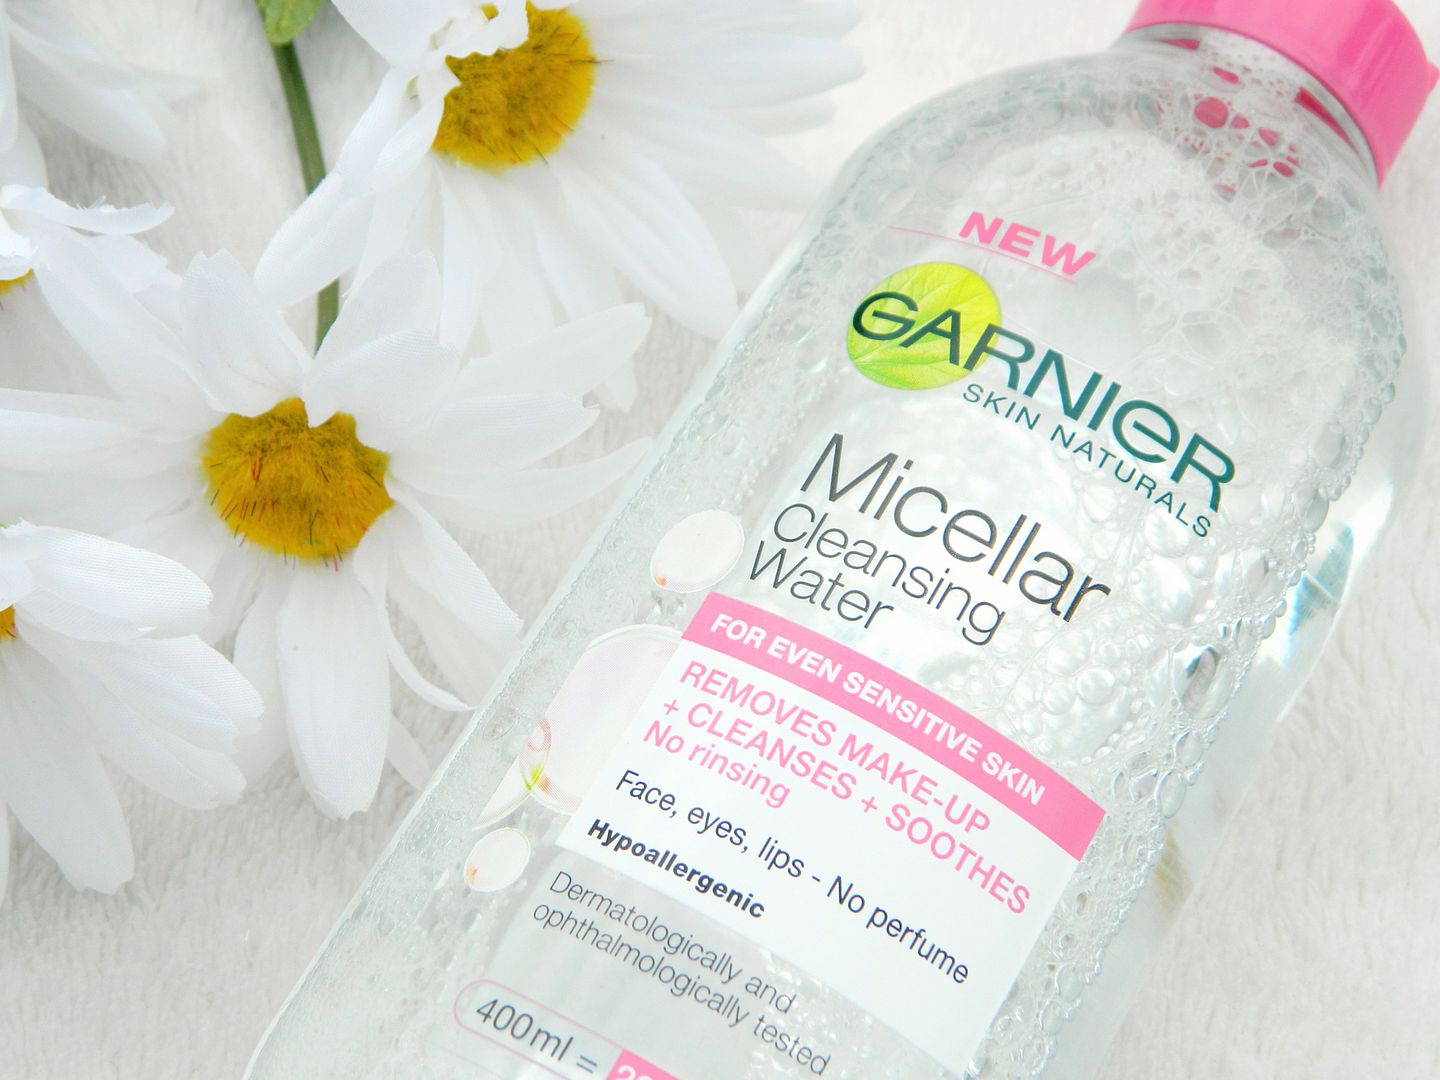 Daily Favourites Garnier Micellar Cleansing Water Review Sensitive Dry Skin Care Routine Bottle Belle-Amie UK Beauty Fashion Lifestyle Blog